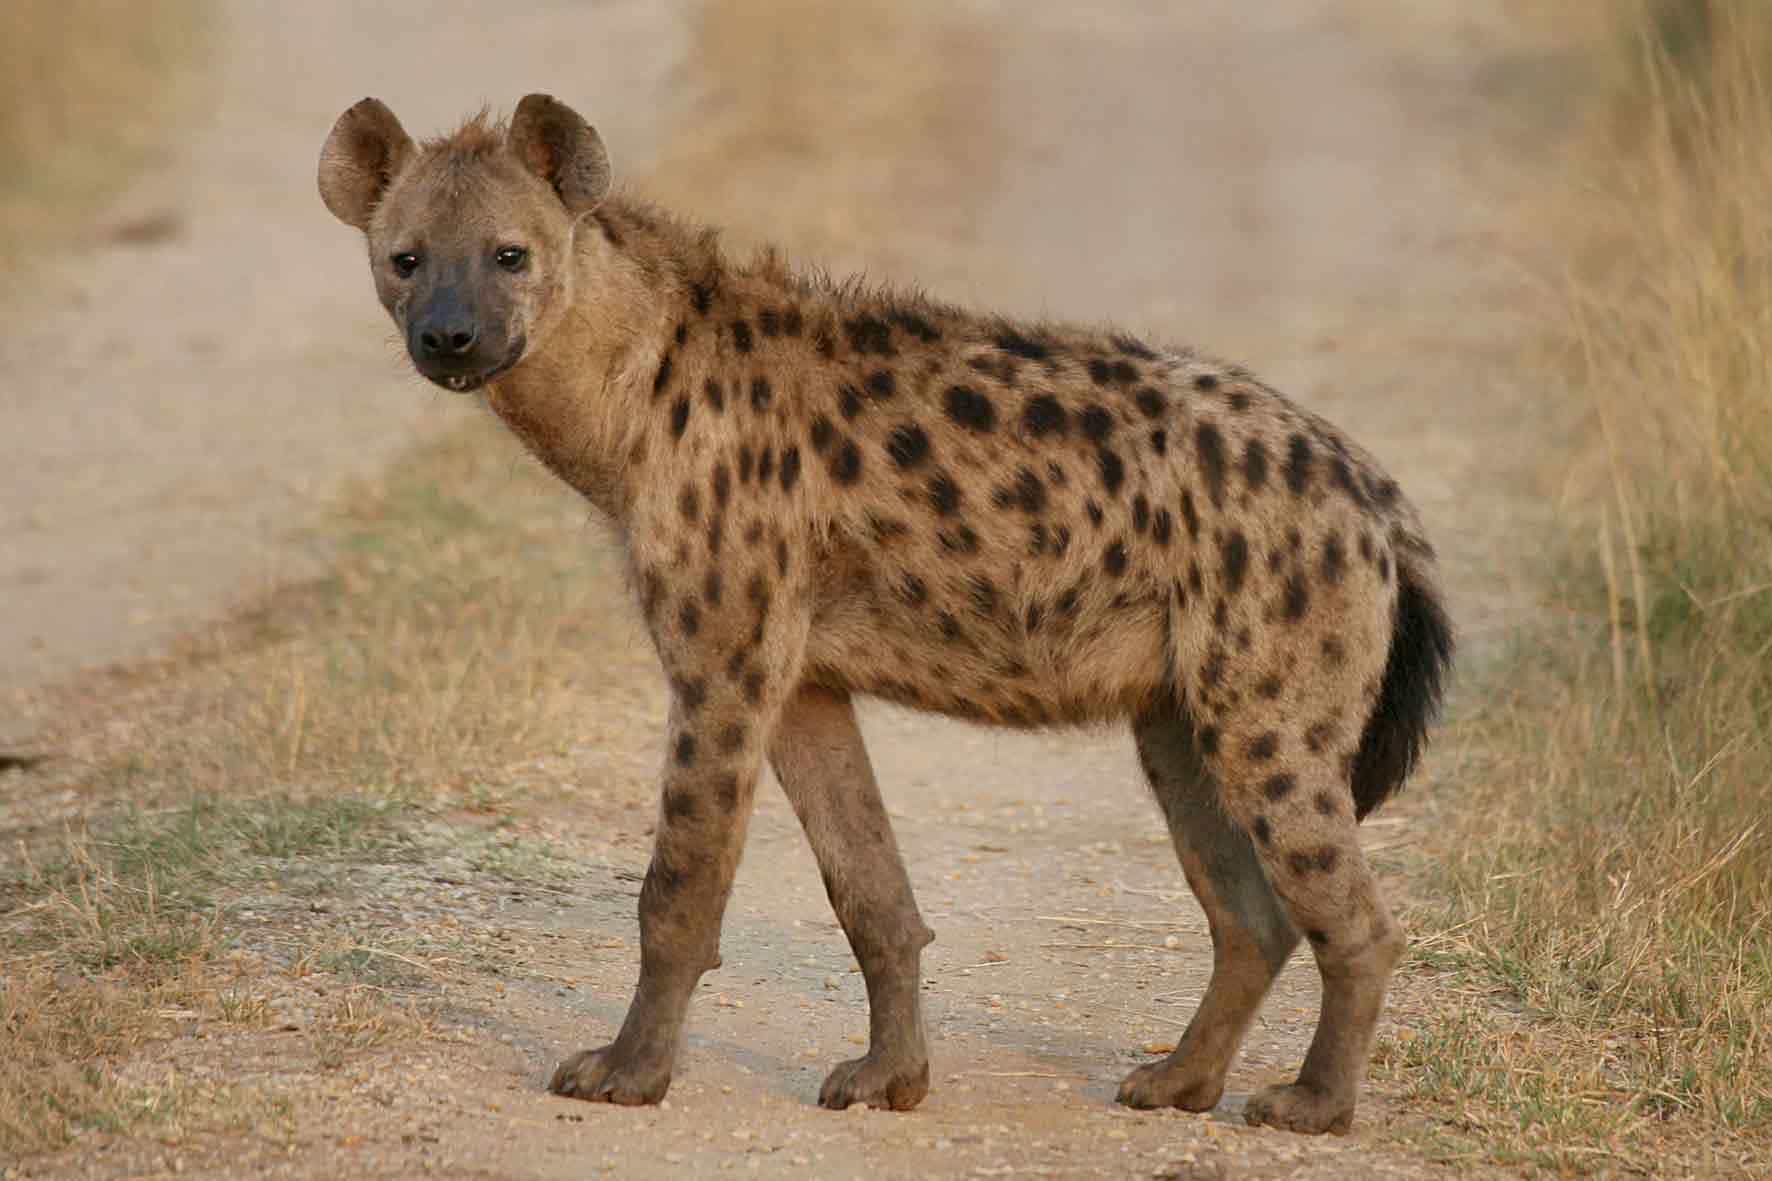 Hyena at Forest - Spotted Hyena facts - Factins